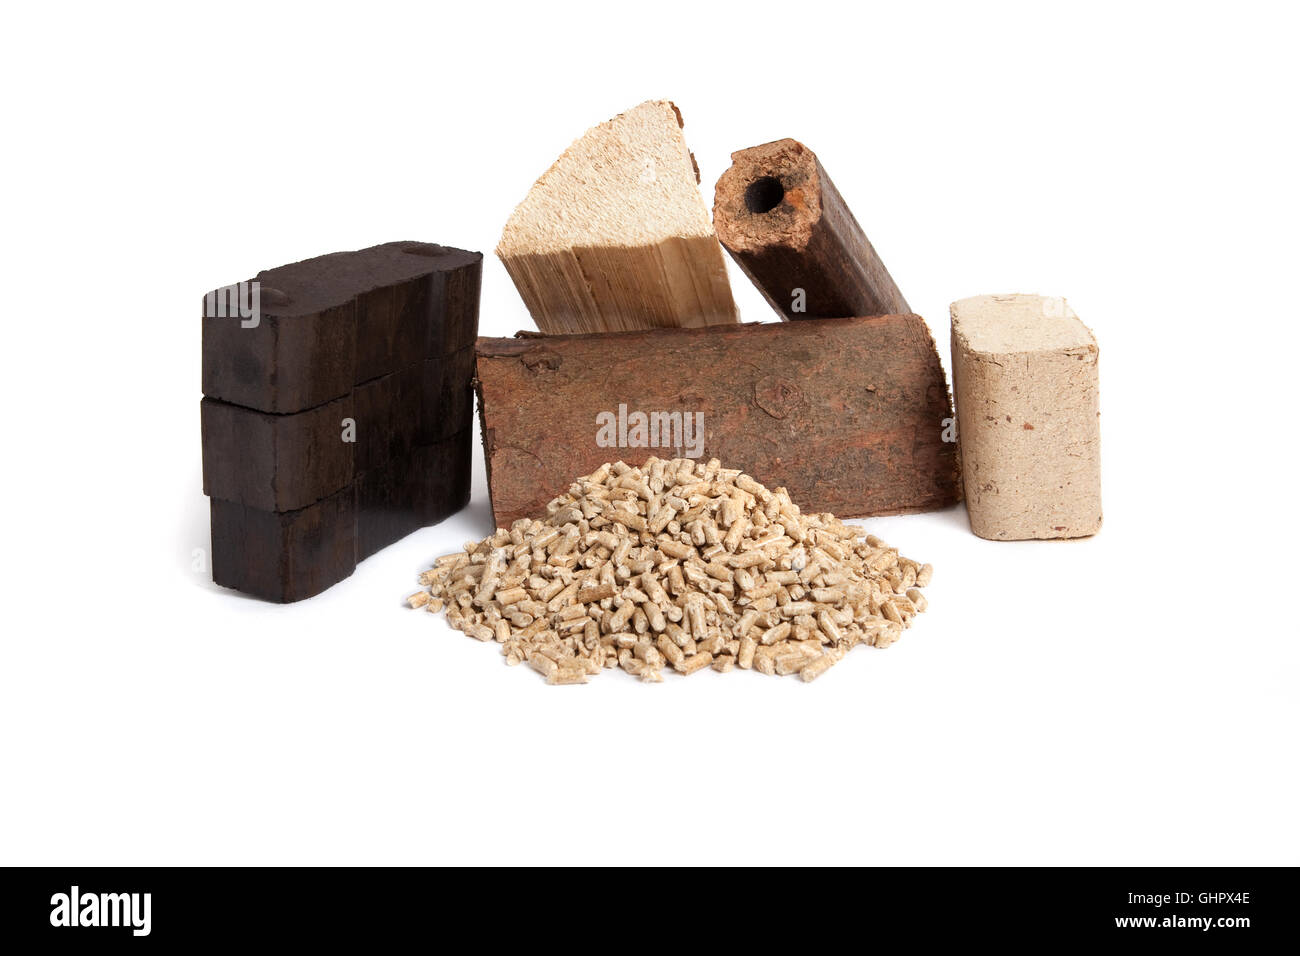 different sorts of fossil fuels, wooden pellets, briquettes, dried firewood, and carbon on white background, isolated, Stock Photo